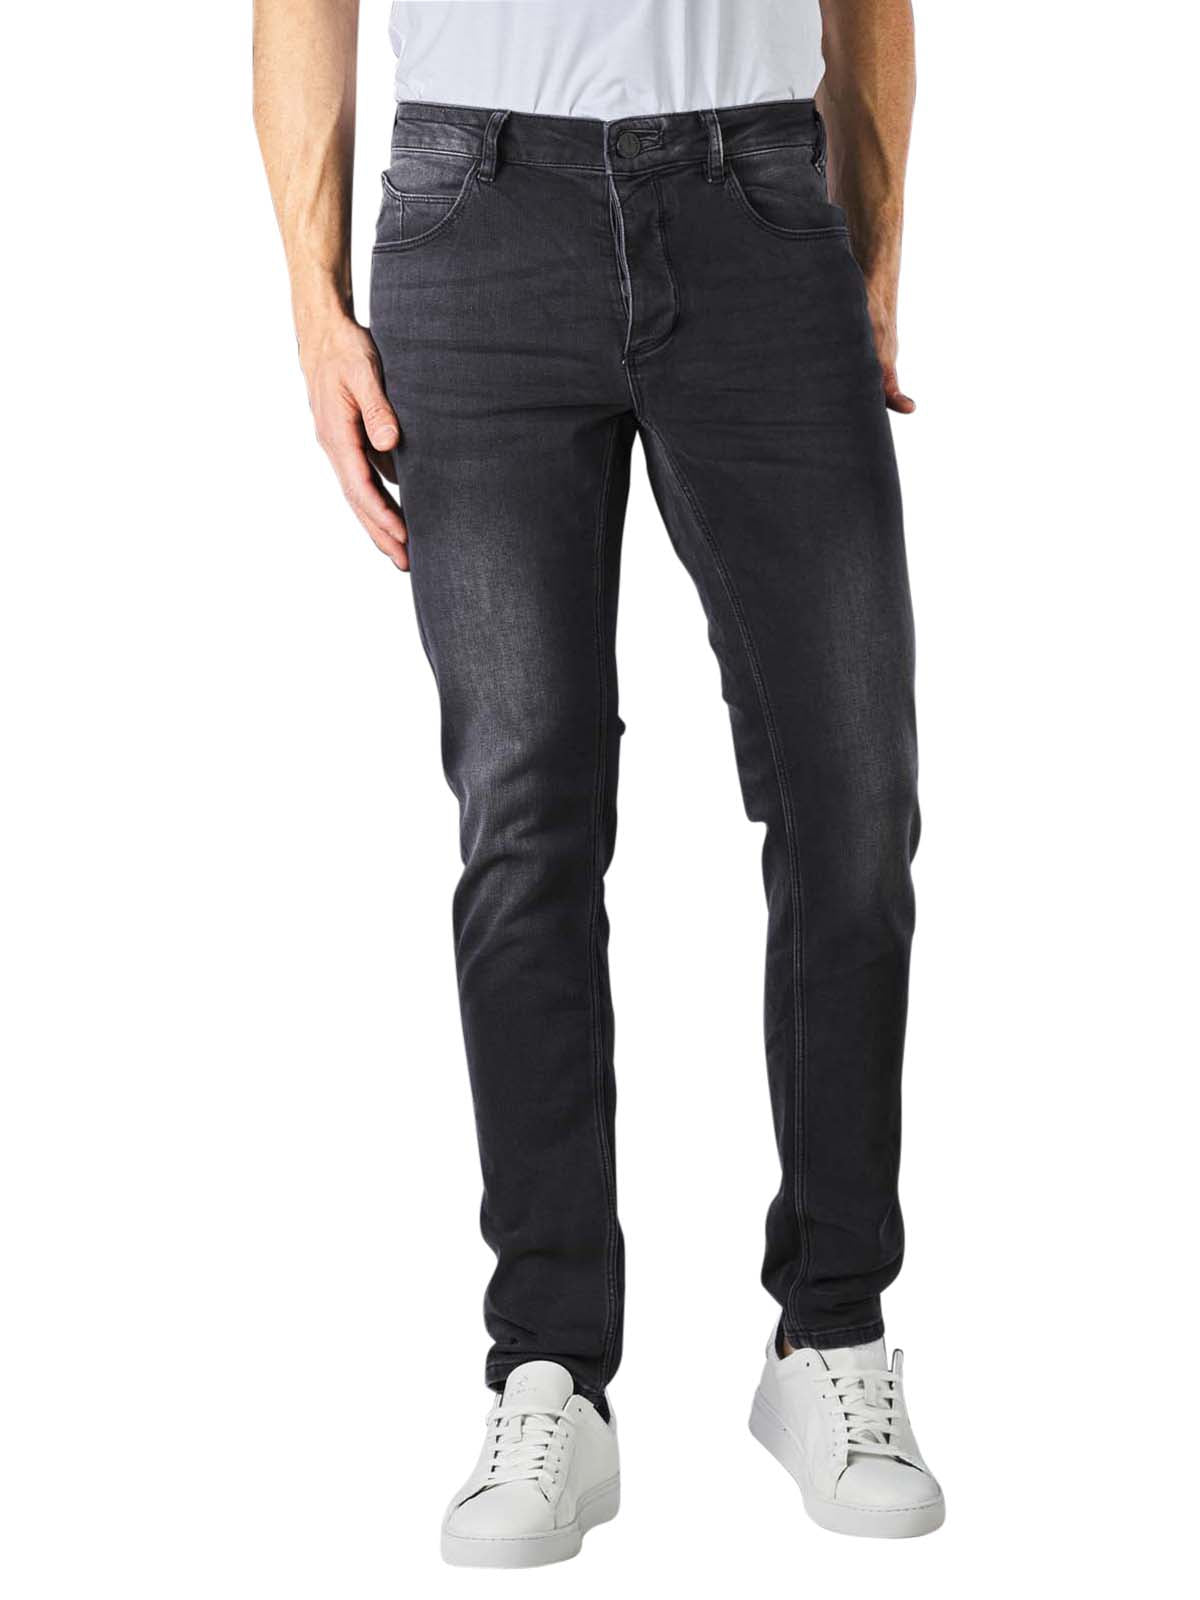 Rey Thor Jeans Rs0491